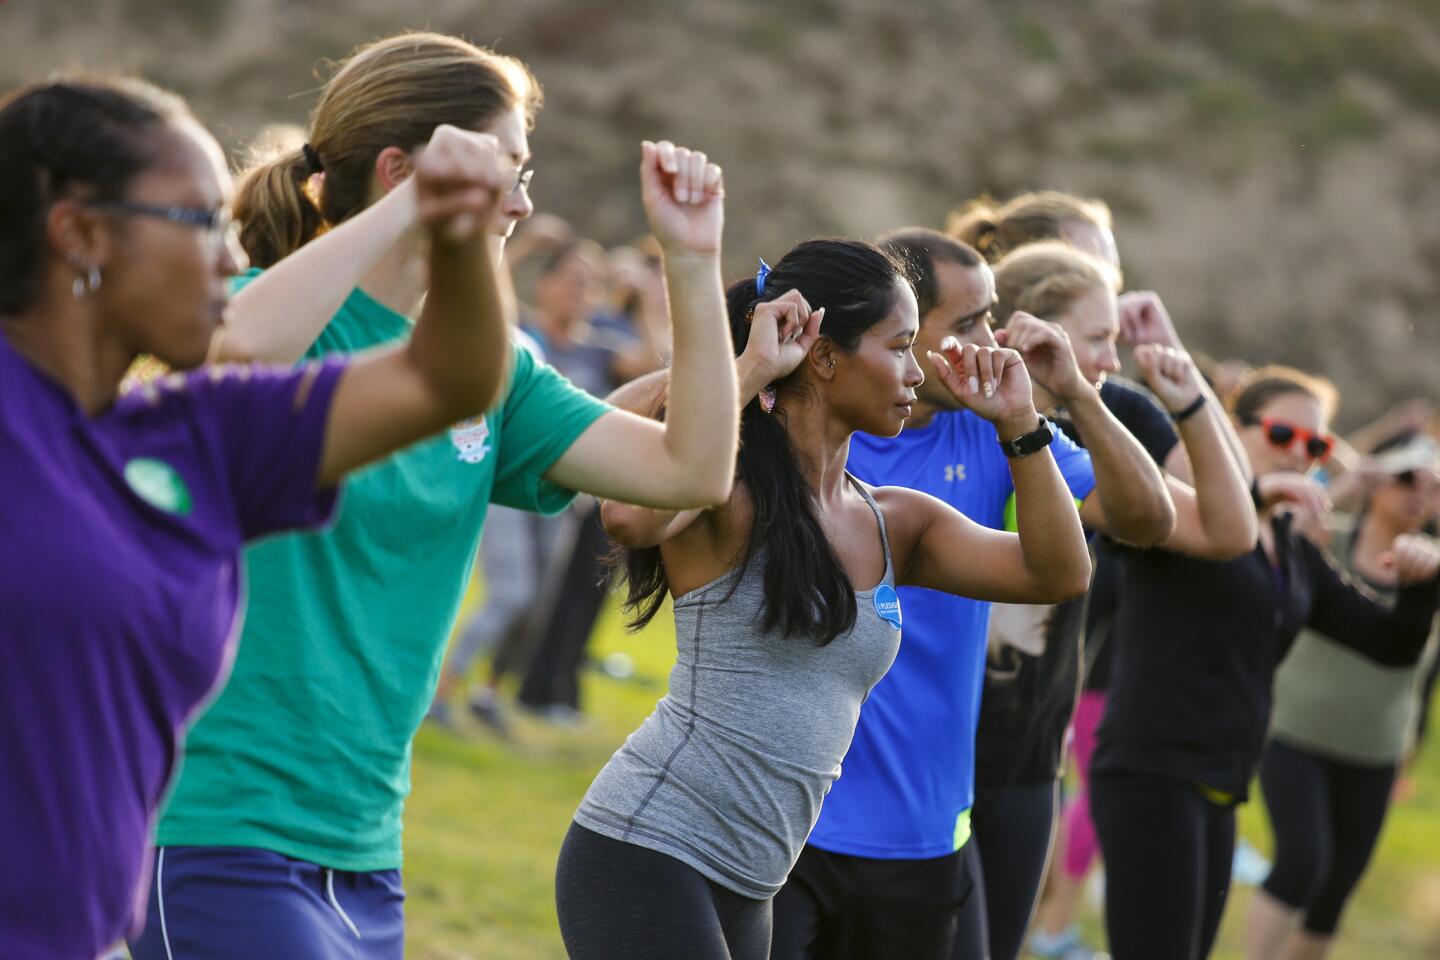 A large crowd, including Kim Tran, center in gray top, filled Redondo Beach's Alta Vista Park for an hour of Zumba.